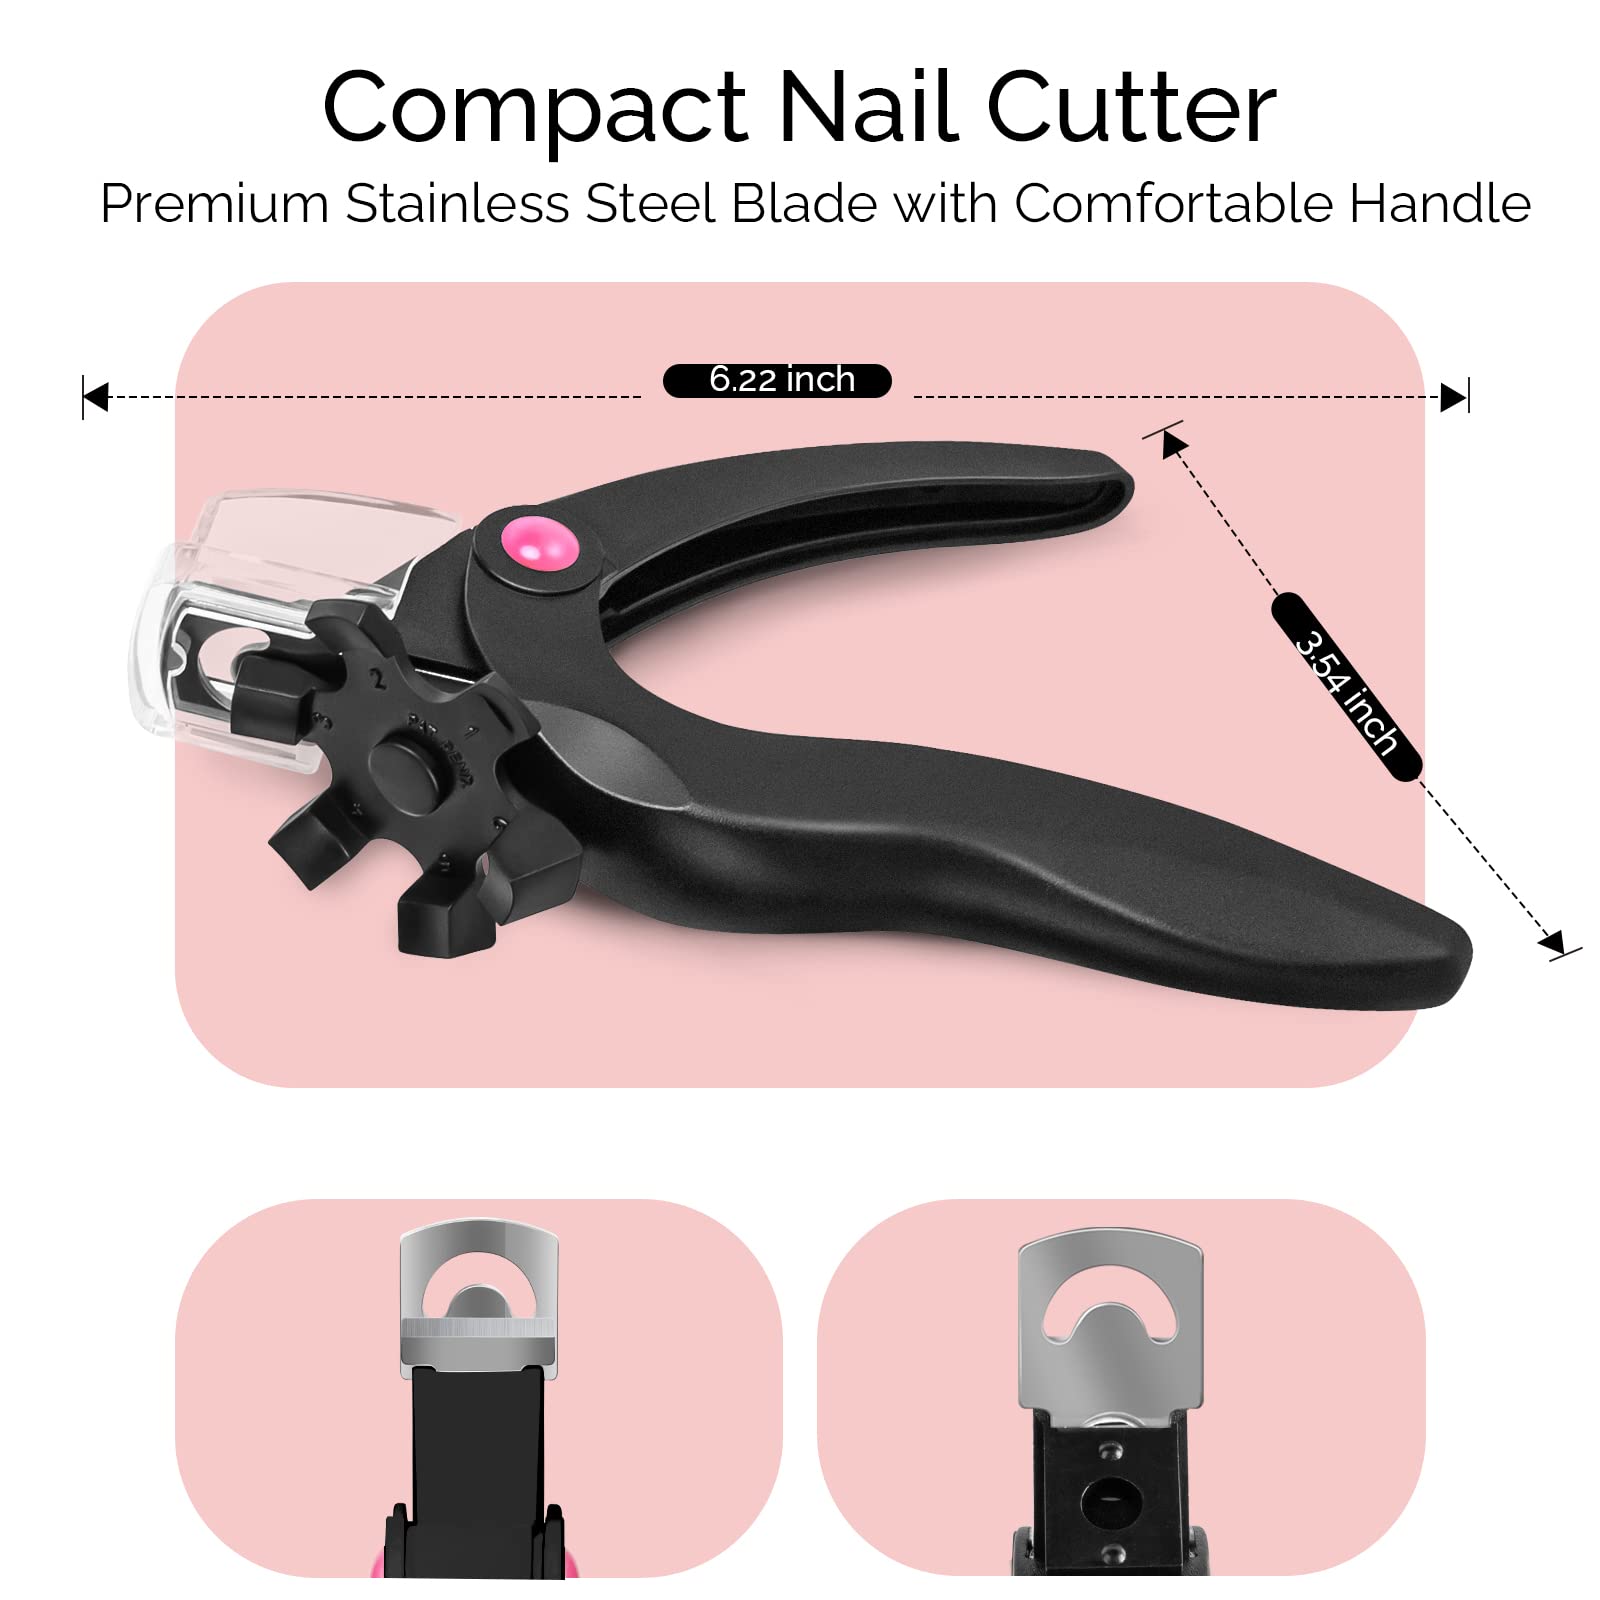 What Are The Best Types Of Clippers For Toenails